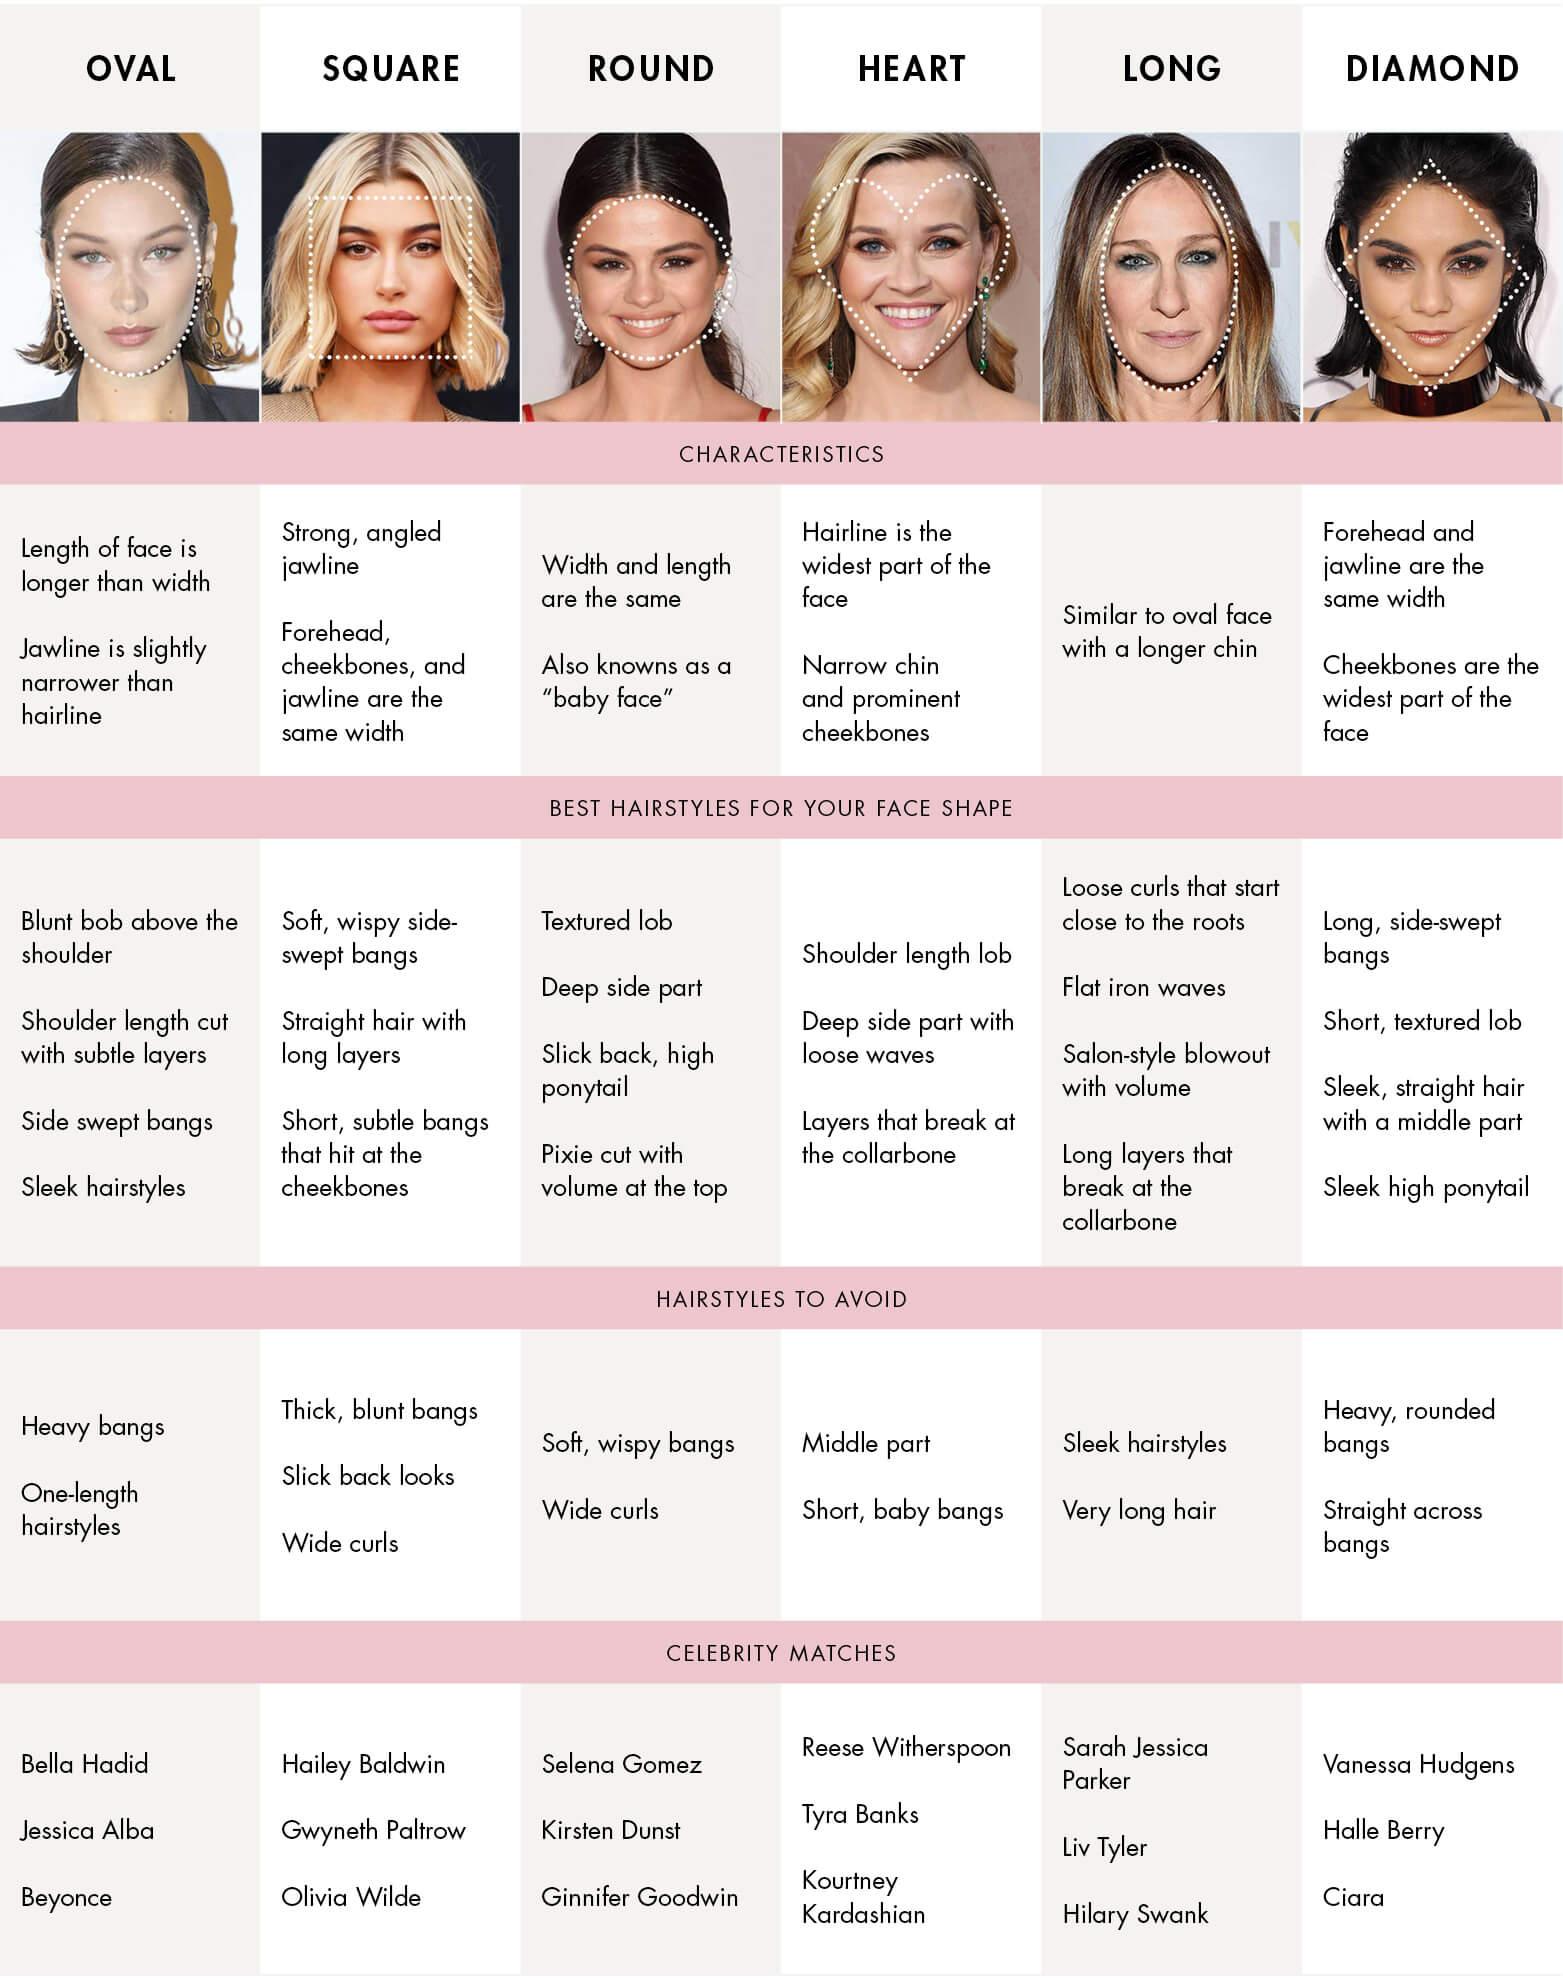 Hairstyles for different face shapes